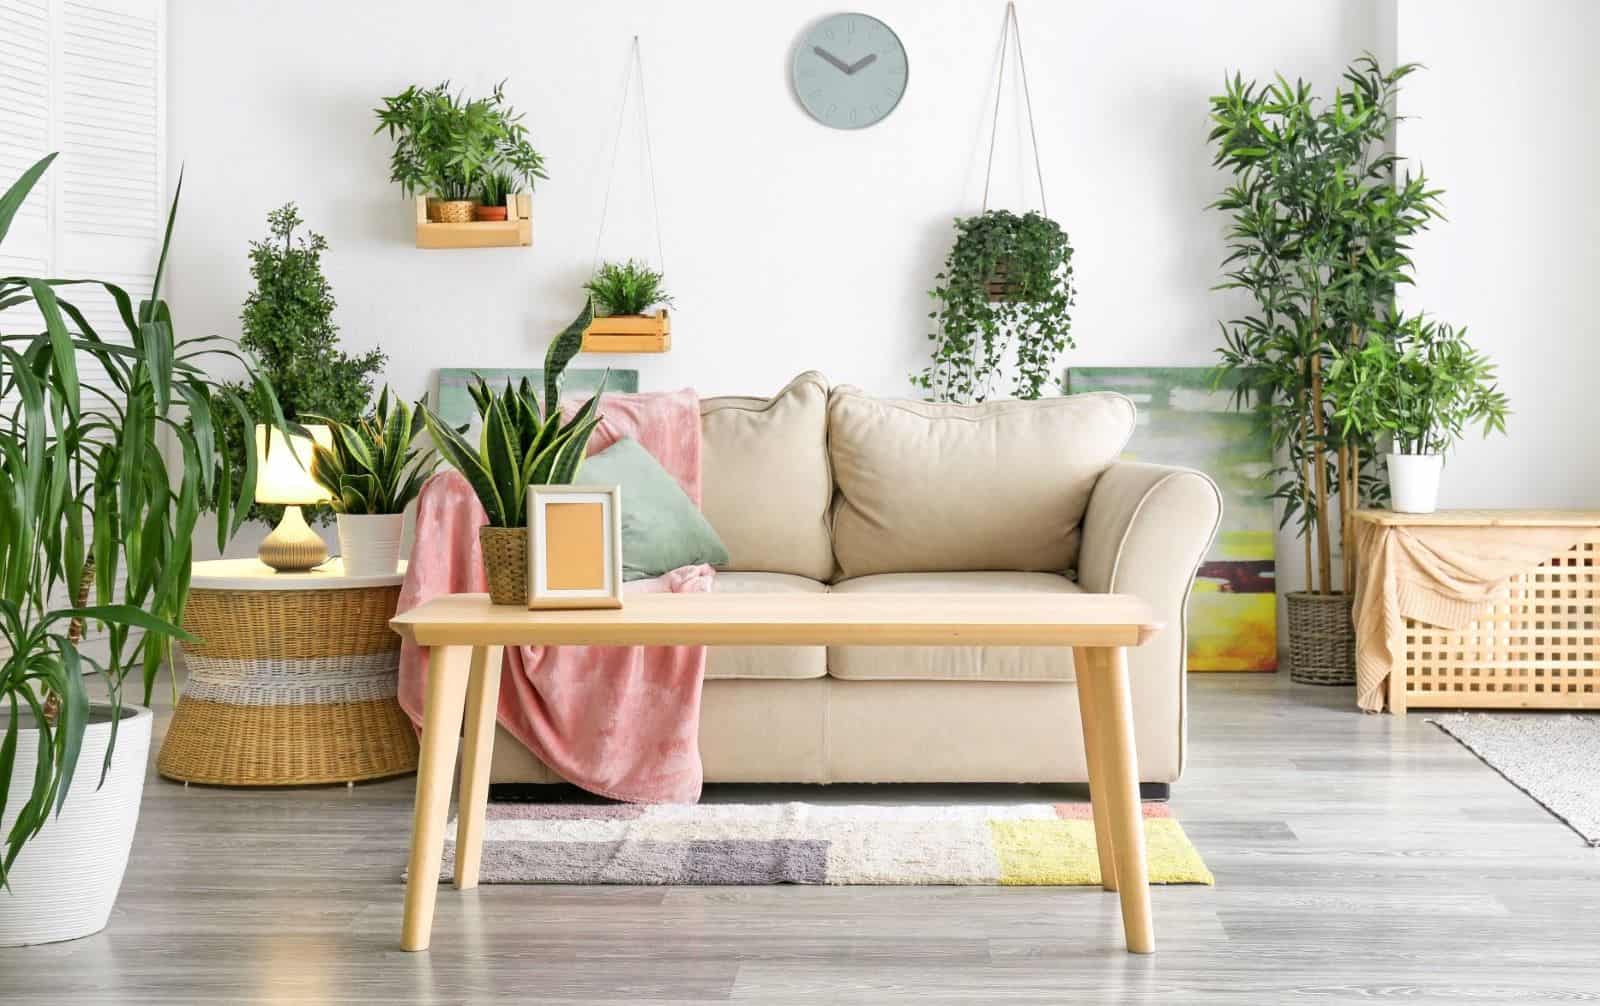 bring the outdoors indoors with wood floors, plants and natural decor